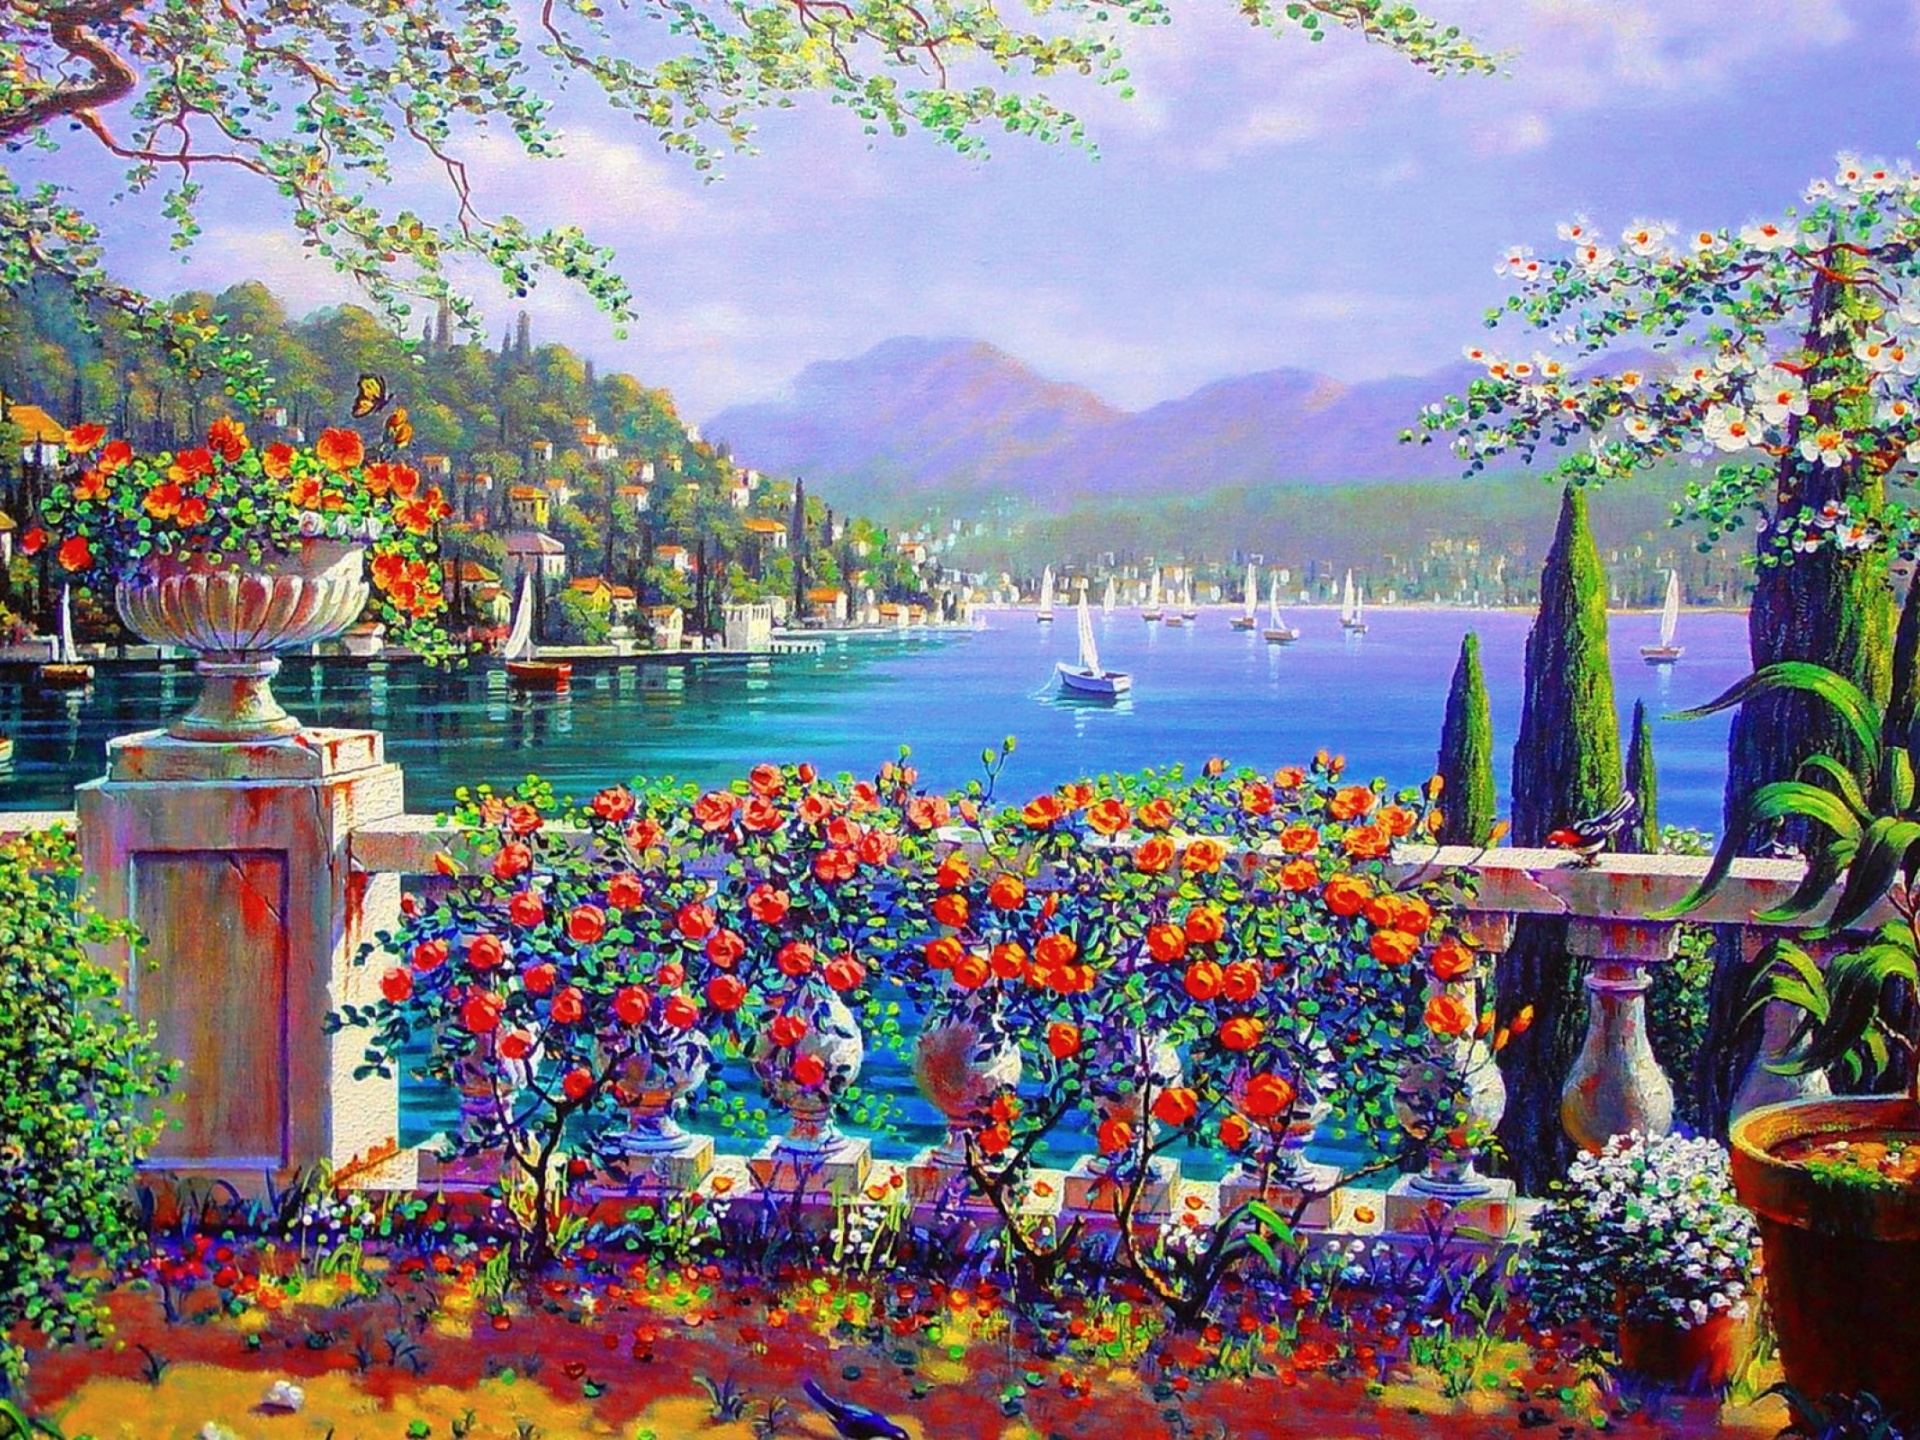 sea, artistic, painting, boat, colorful, flower, italy, landscape, terrace, tree